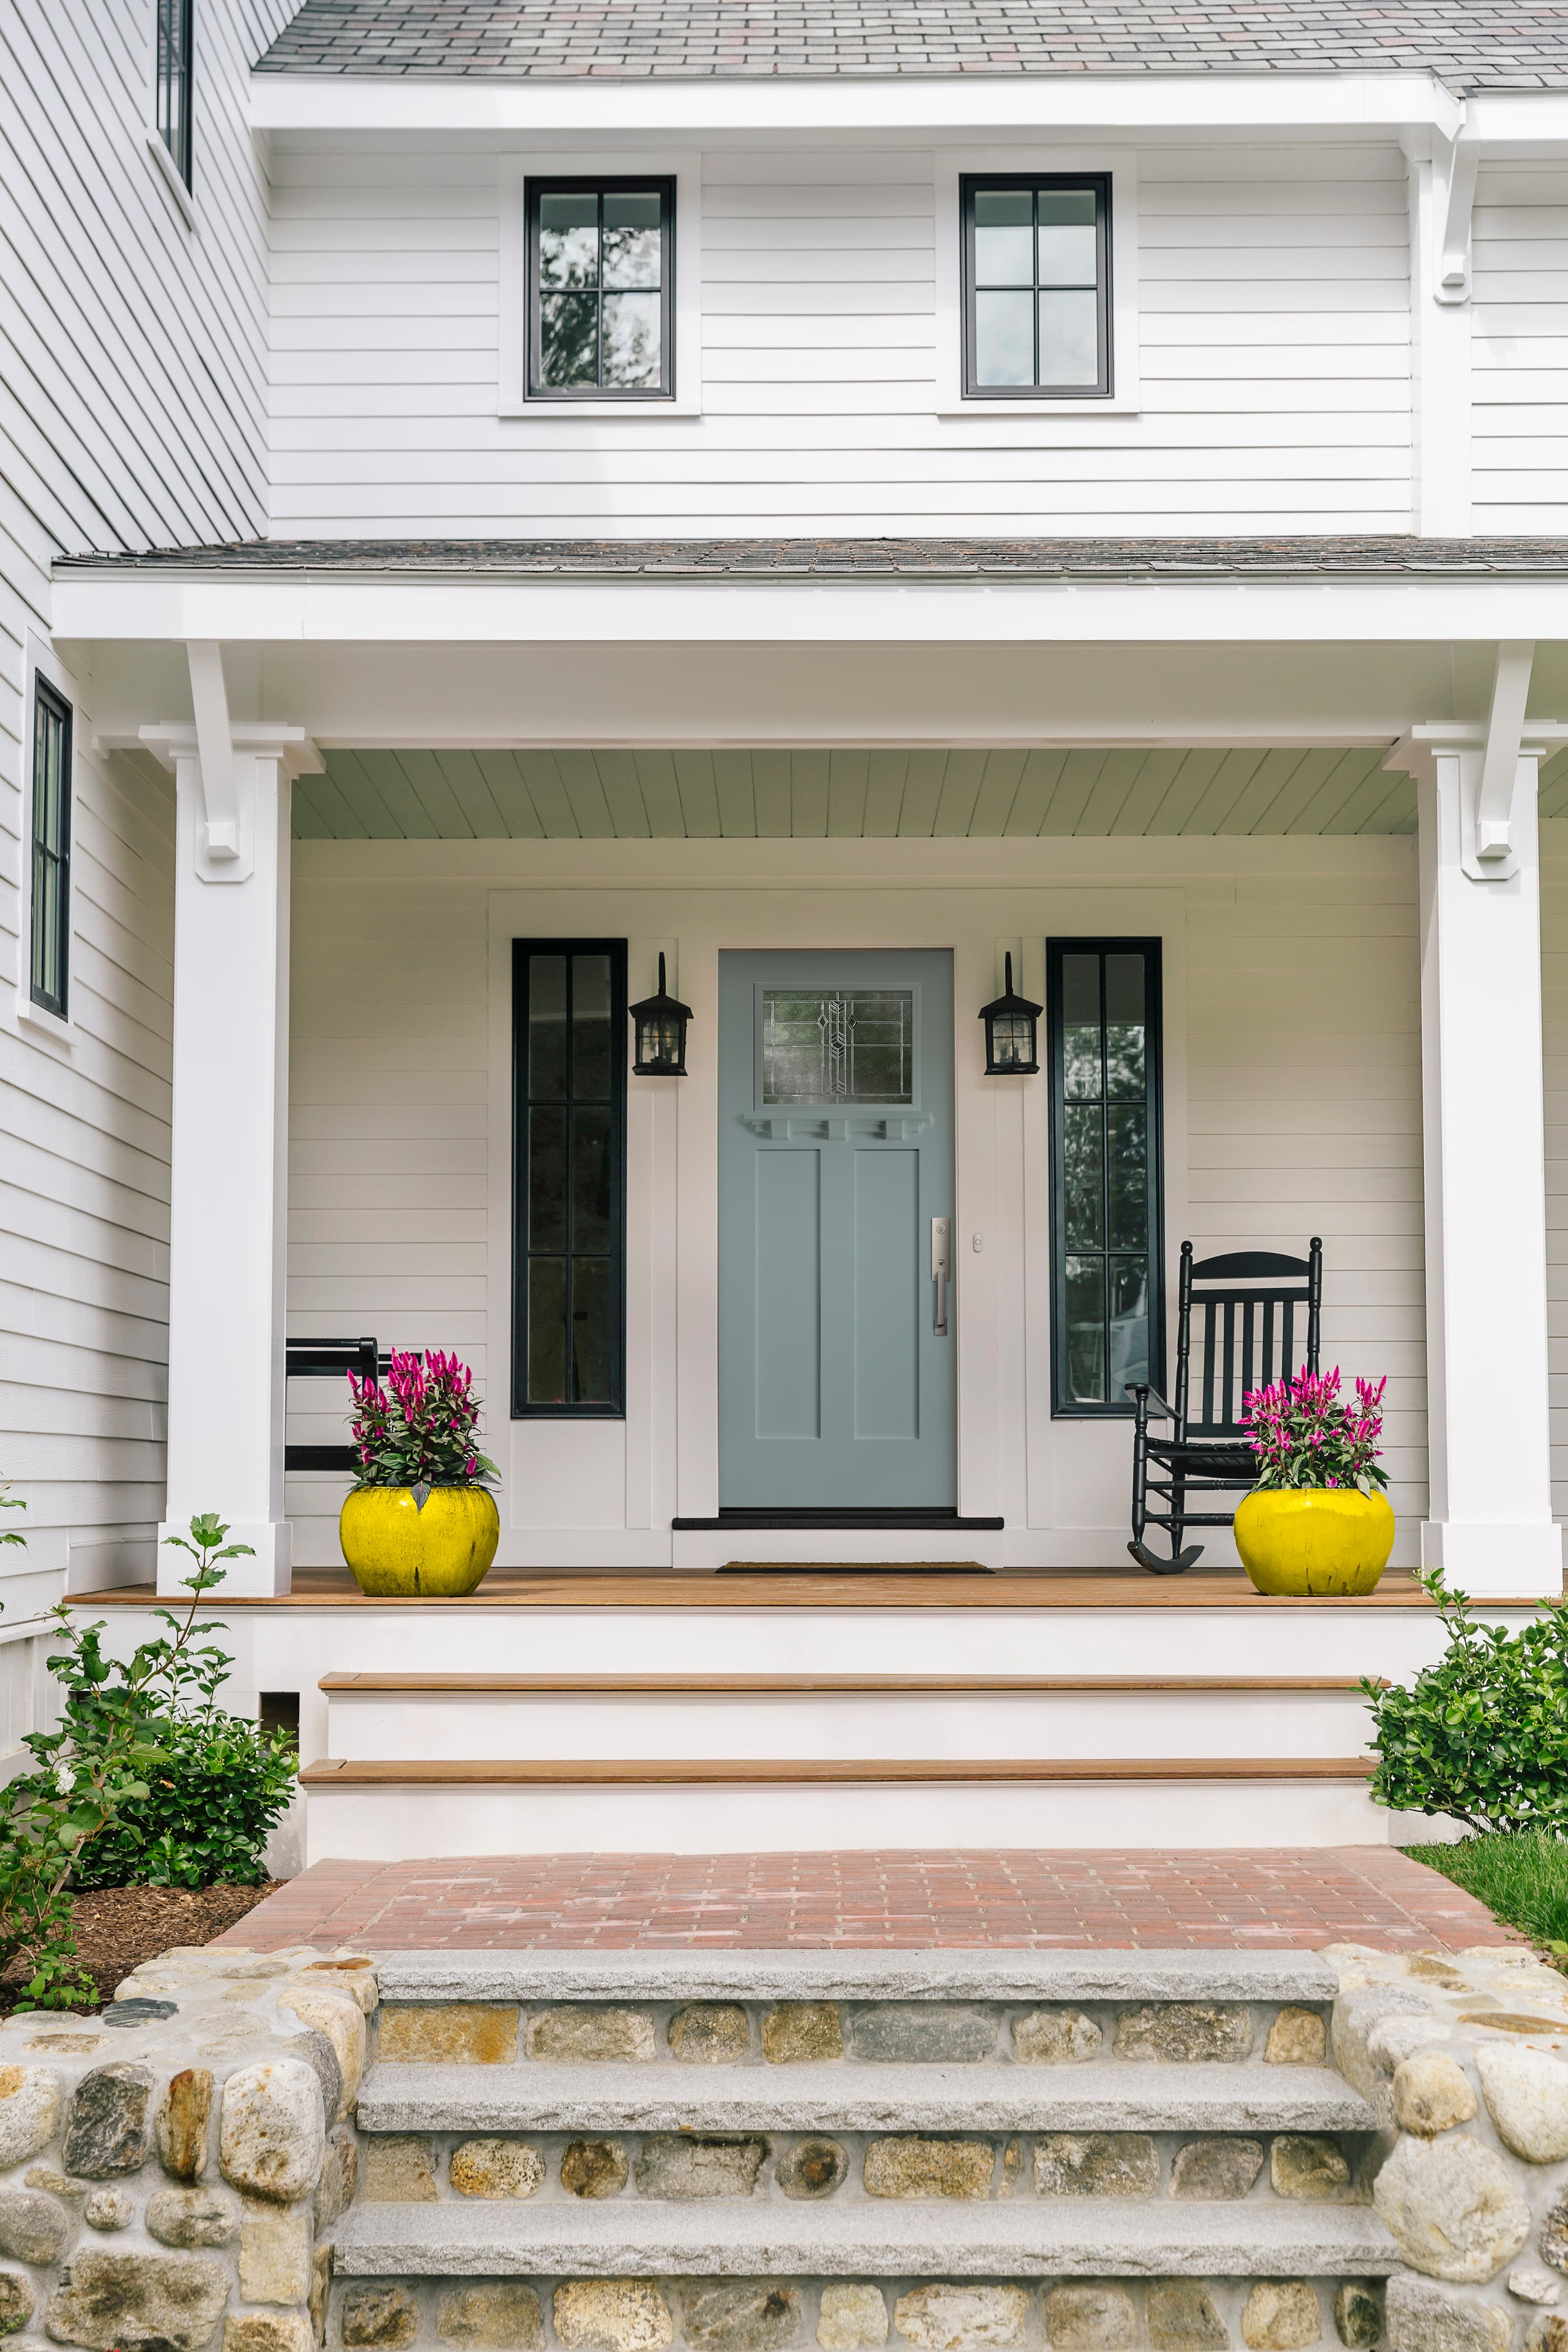 Blue craftsman front door with decorative glass and modern hardware surrounded by black windows on white house